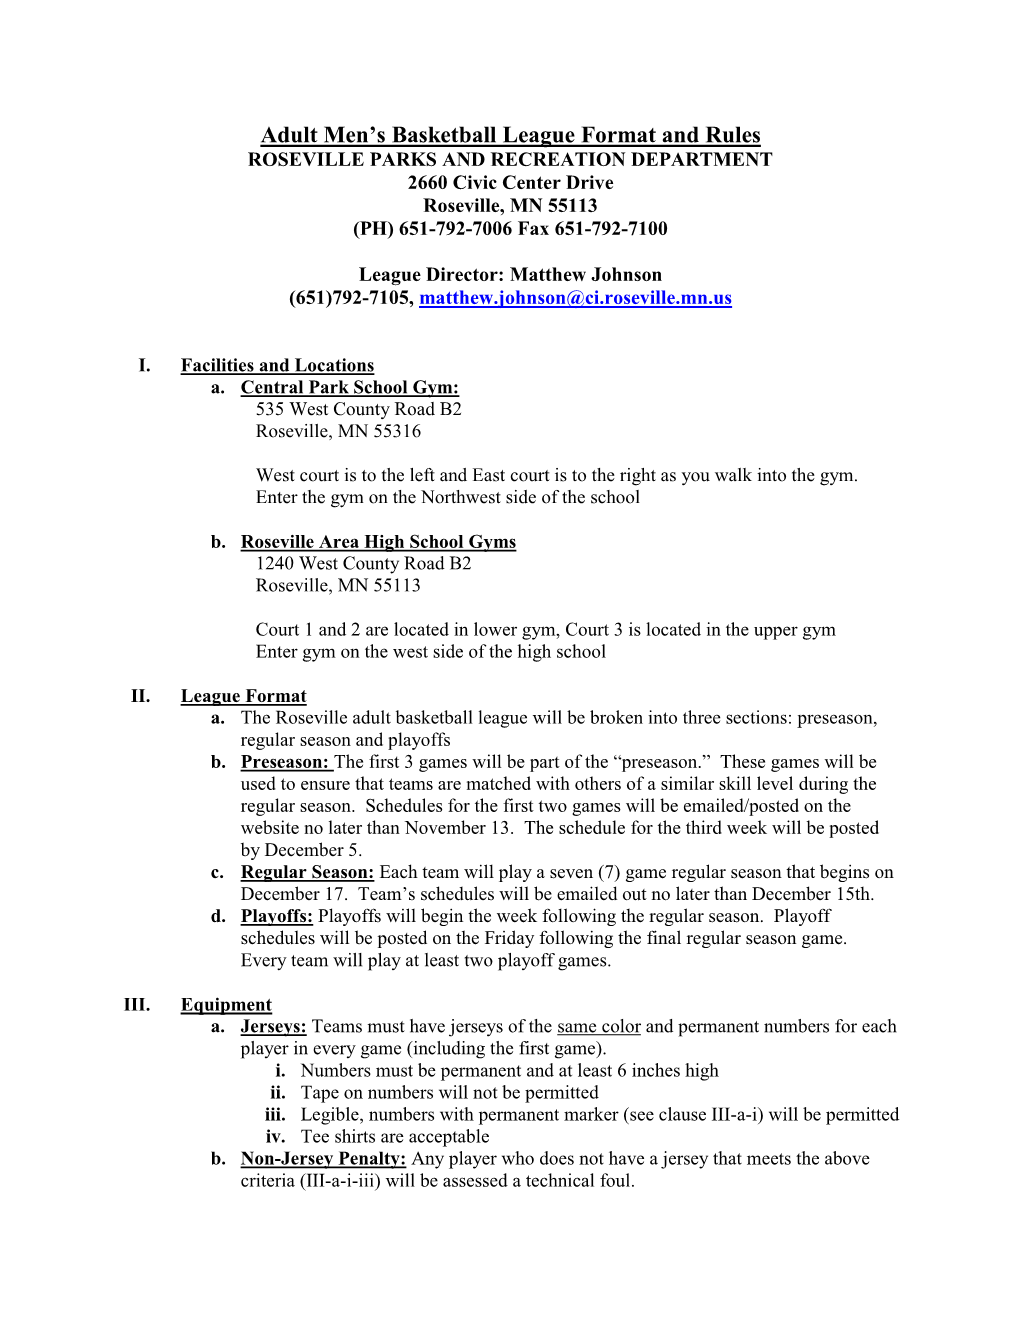 Adult Men's Basketball League Format and Rules